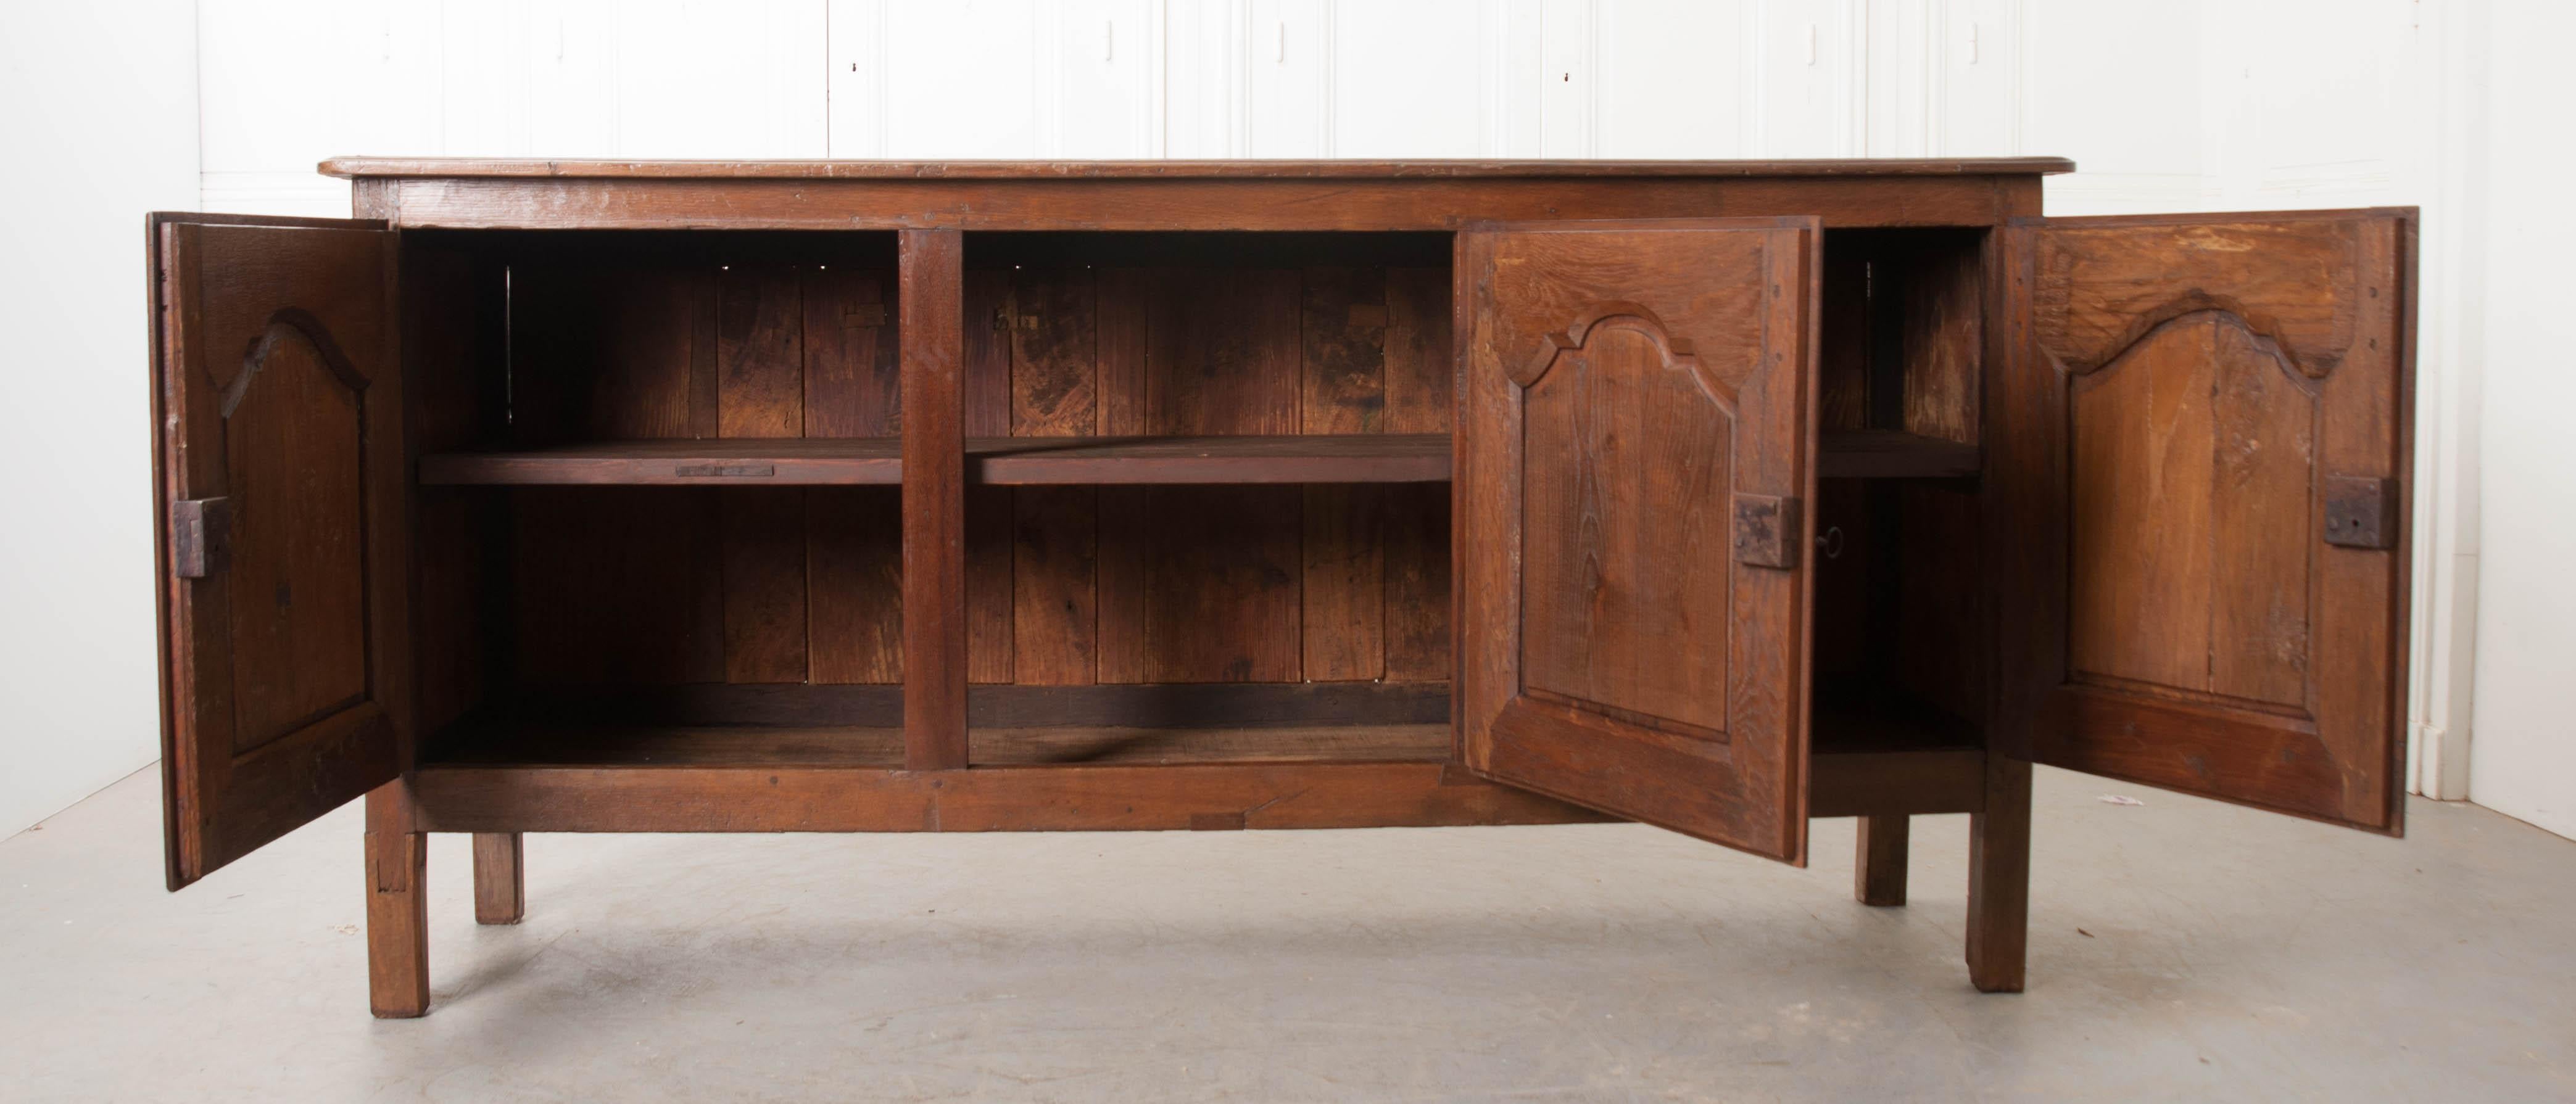 This handsome carved French enfilade, circa 1750, was found in the Provincial countryside and constructed of solid walnut and chestnut. The carved top rests above three doors, with shaped panels, which open to reveal a single fixed shelf, and the